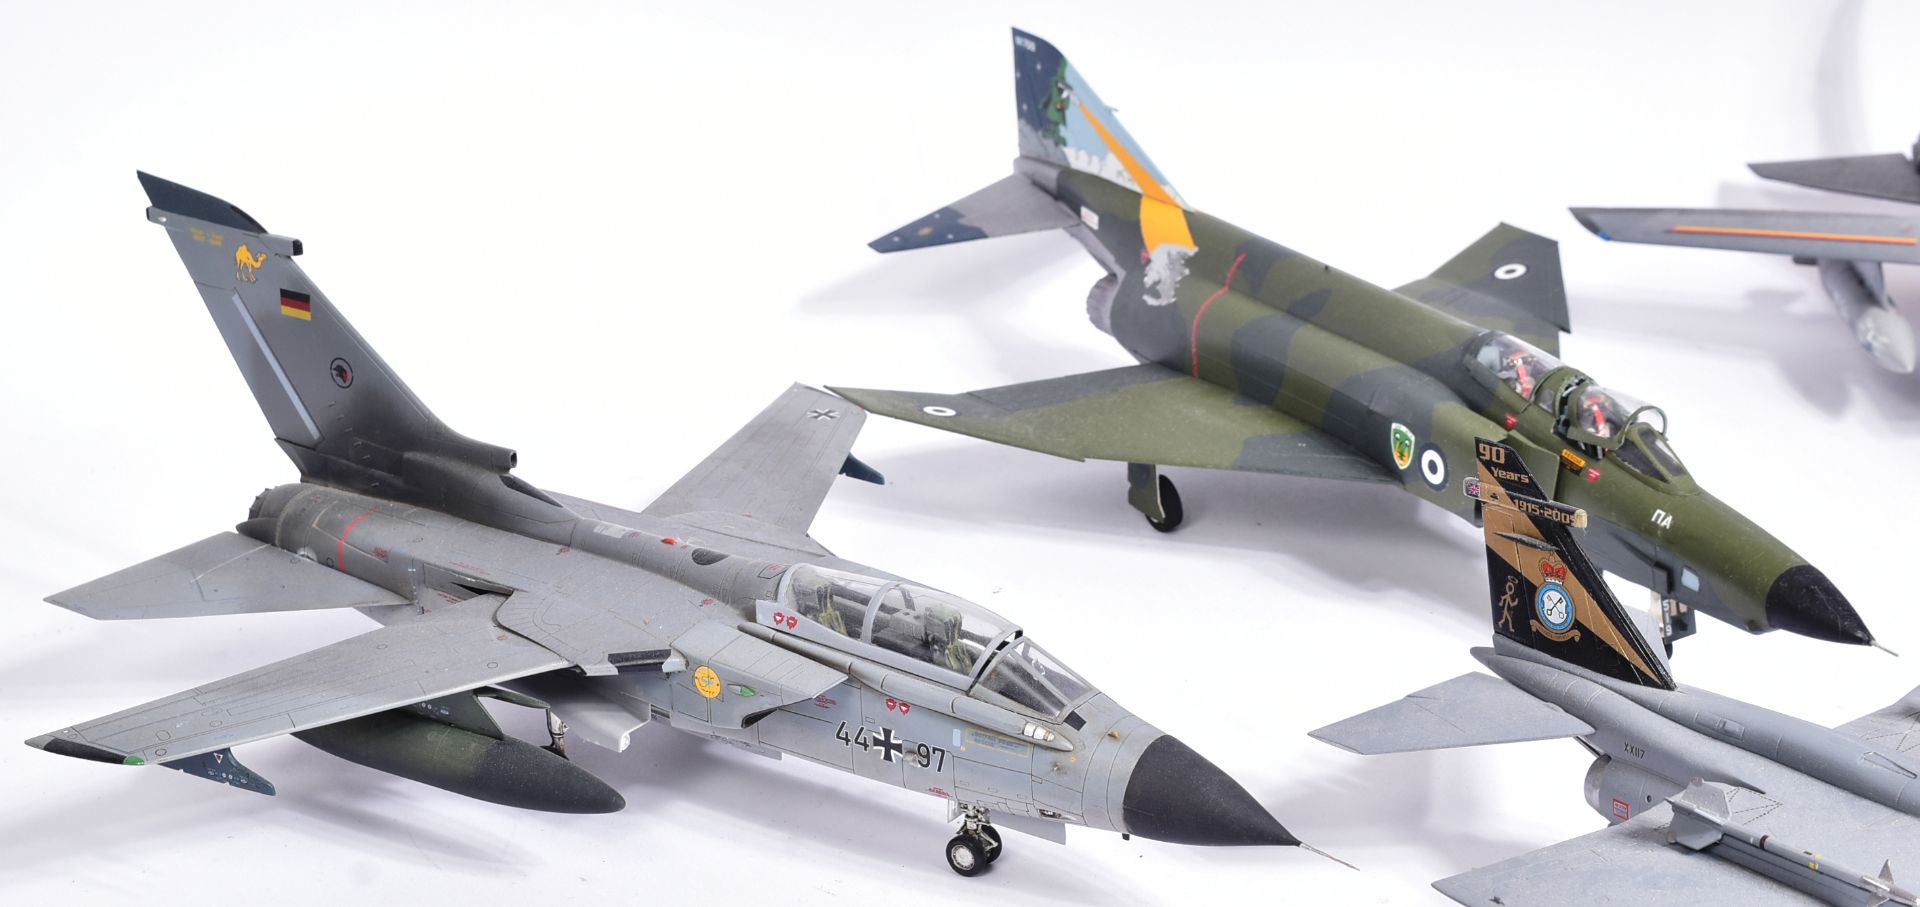 MODEL KITS - COLLECTION OF X6 BUILT MODEL KITS OF AIRCRAFT INTEREST - Image 2 of 5